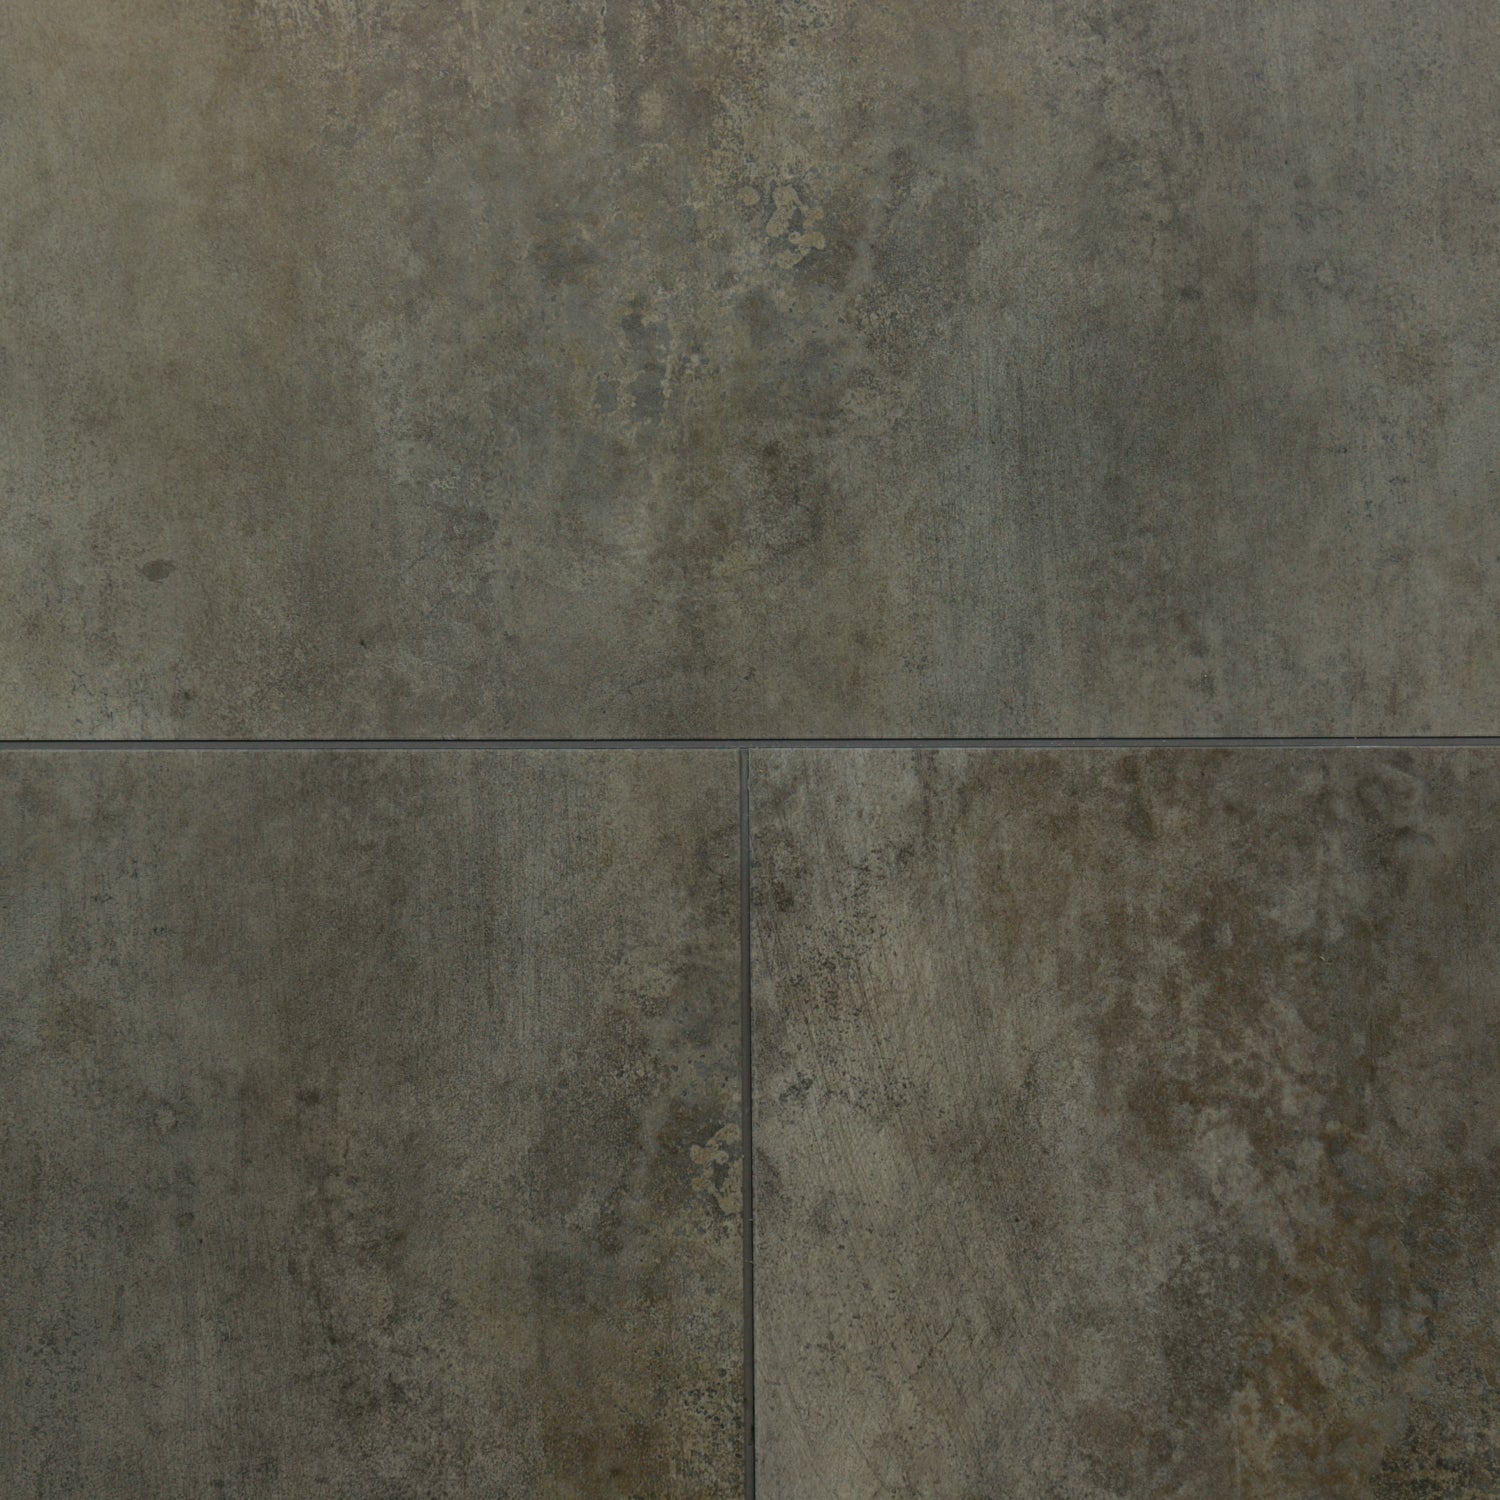 FirmFit Stone Grout Riven Grey Stone LT1419